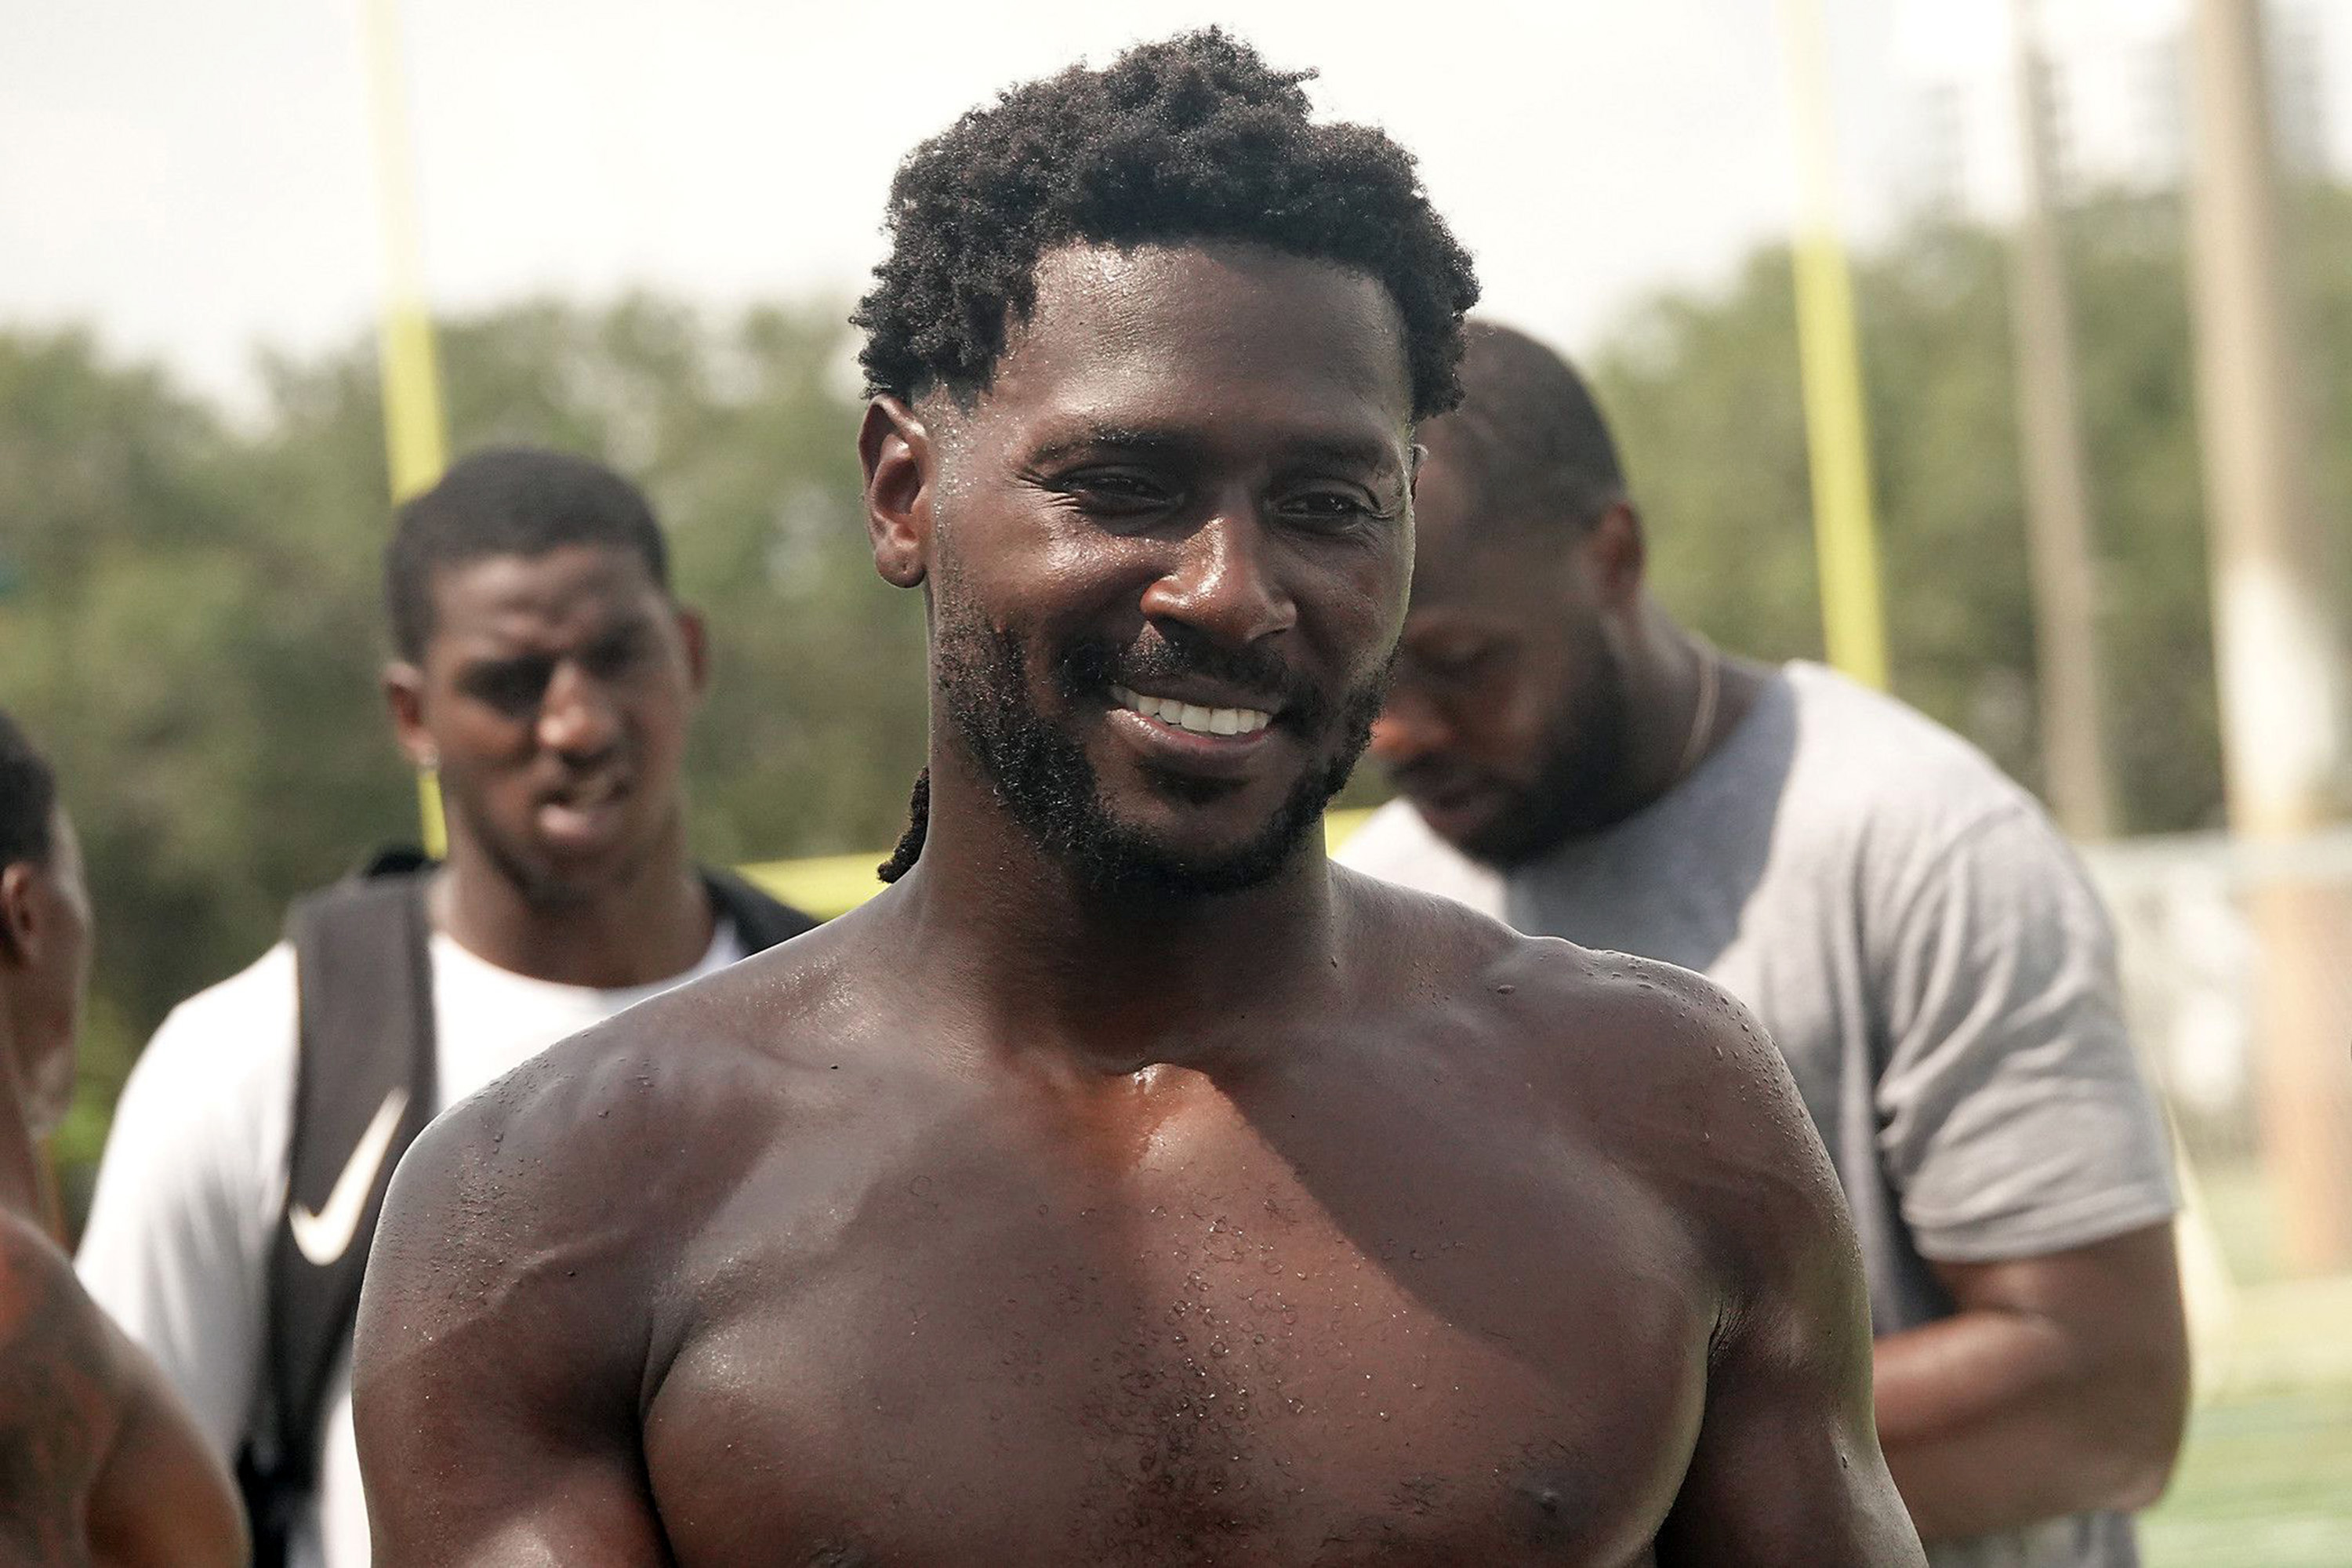 Antonio Brown’s Retirement Is Getting Off to the Worst Start Possible With Suspension